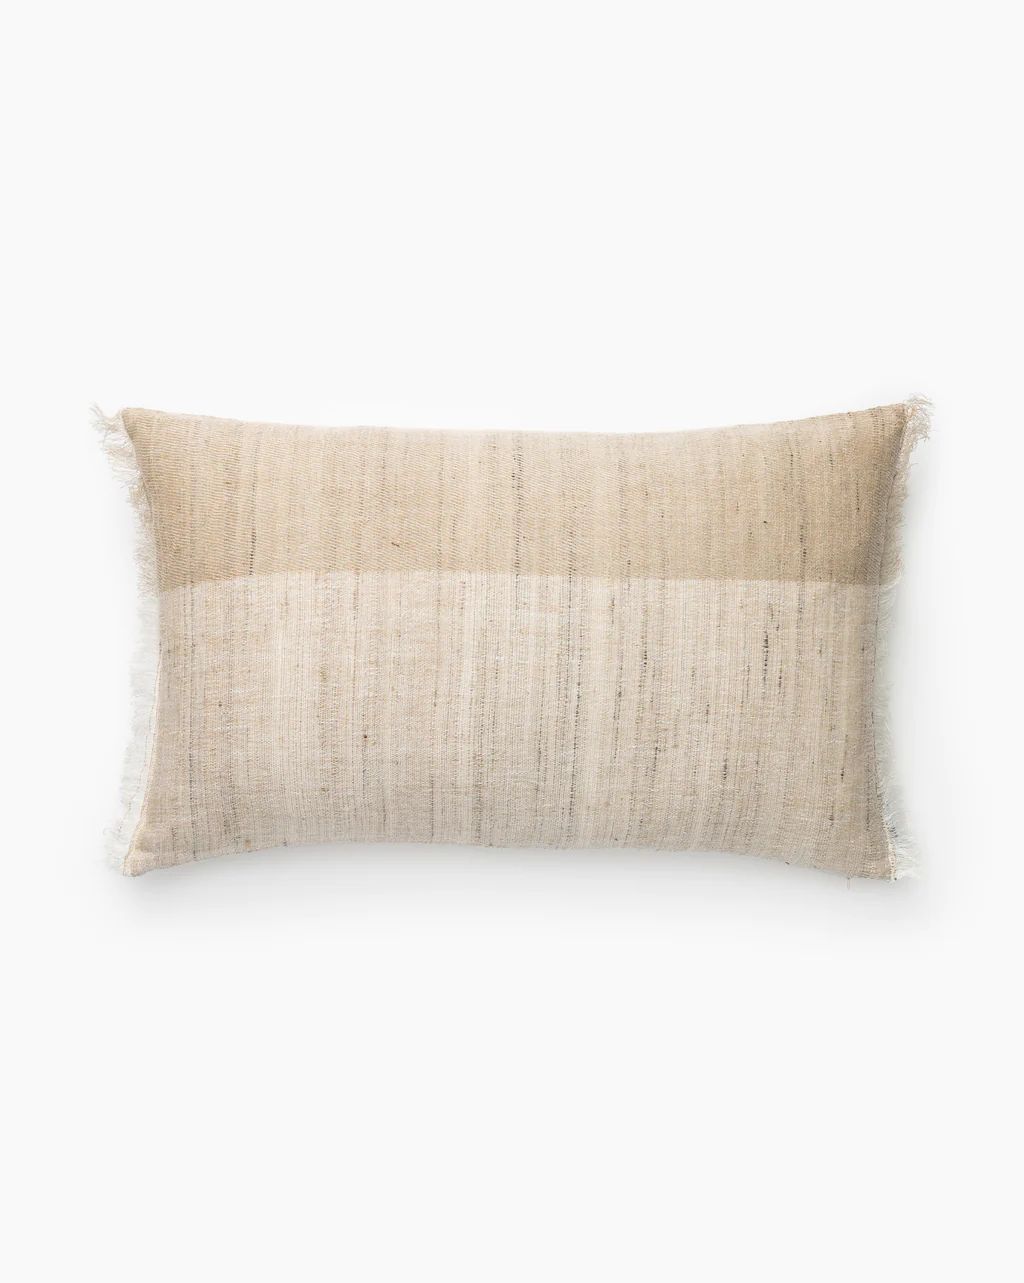 Suzie Pillow Cover | McGee & Co.